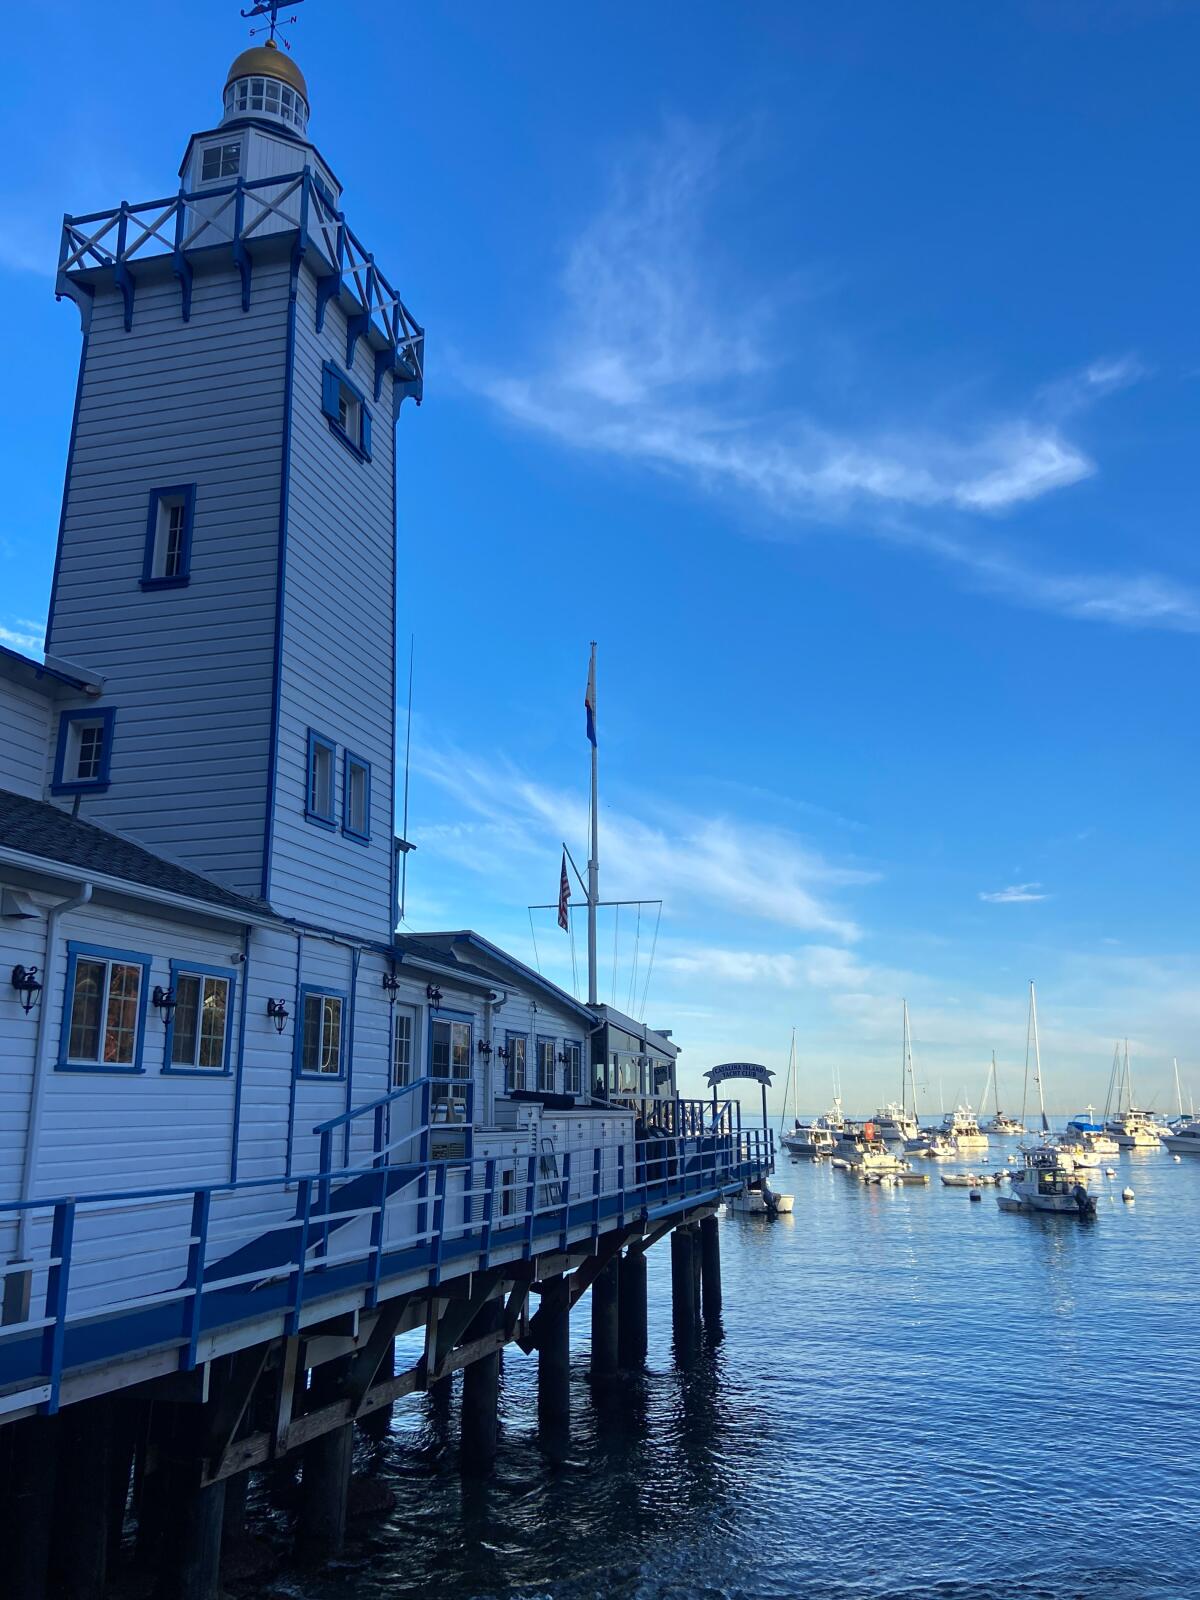 The Catalina Island Yacht Club is one of the oldest in Southern California.